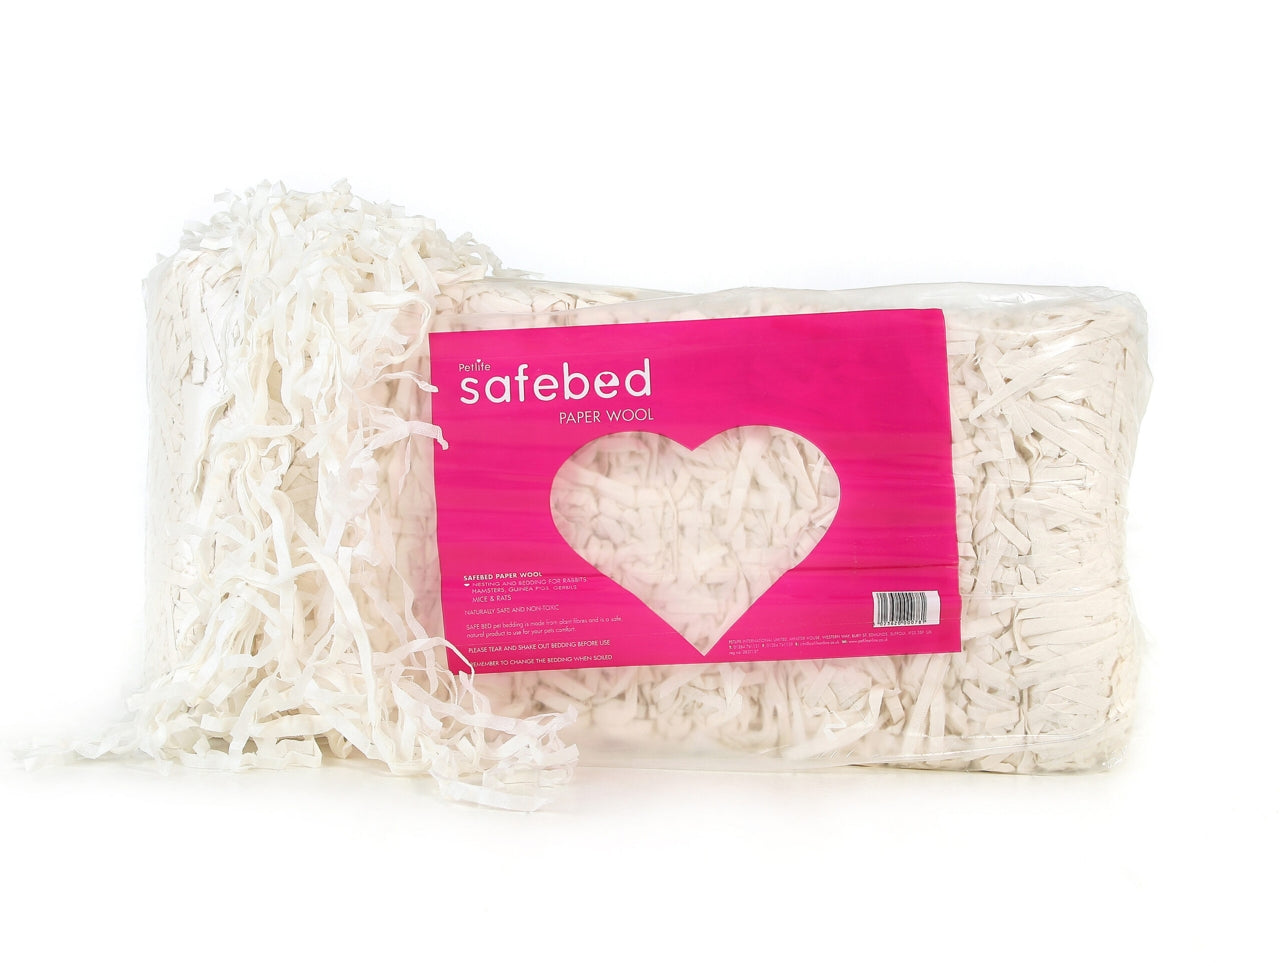 Petlife - Safebed Paper Wool Bedding - Carry Home Bag 300g (approx.)